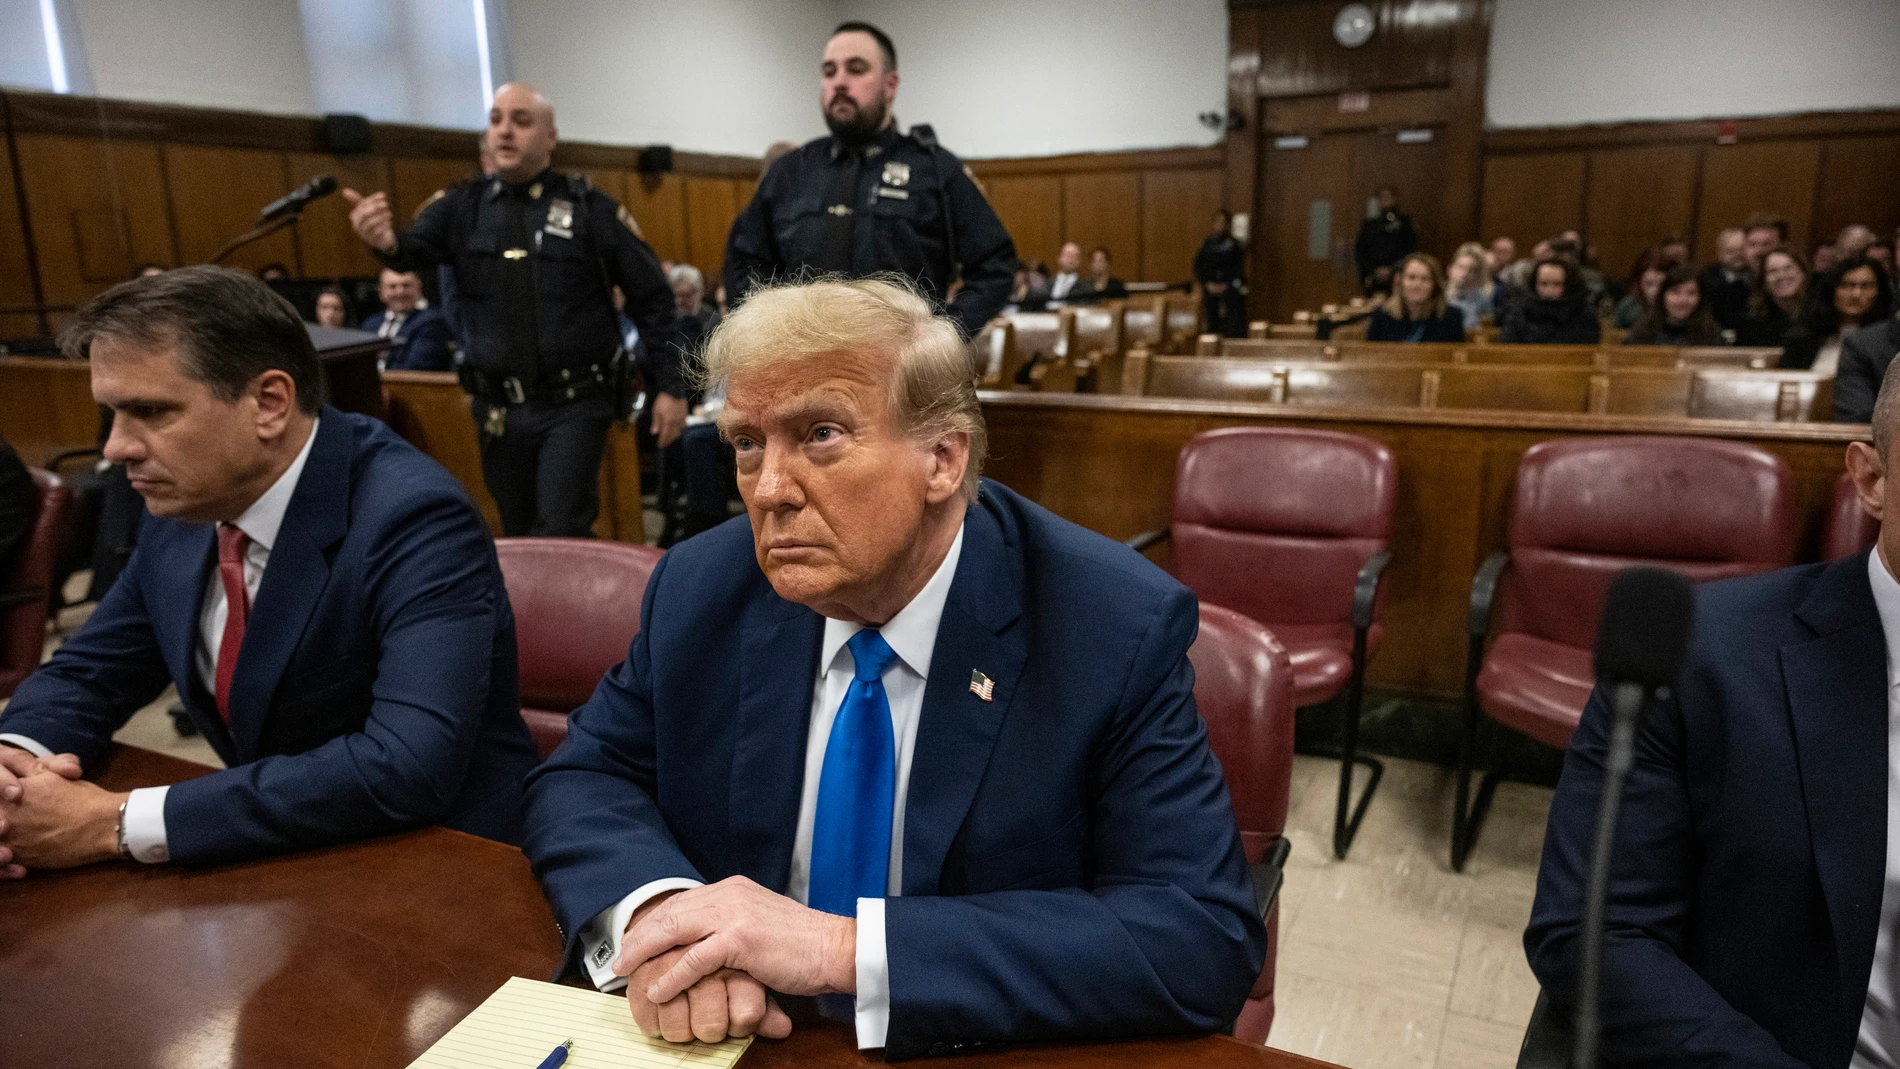 Former President Donald Trump sits in court on the first day of opening arguments in his trial at Manhattan Criminal Court in New York, Monday, April 22, 2024. (Victor J. Blue/The Washington Post via AP, Pool)